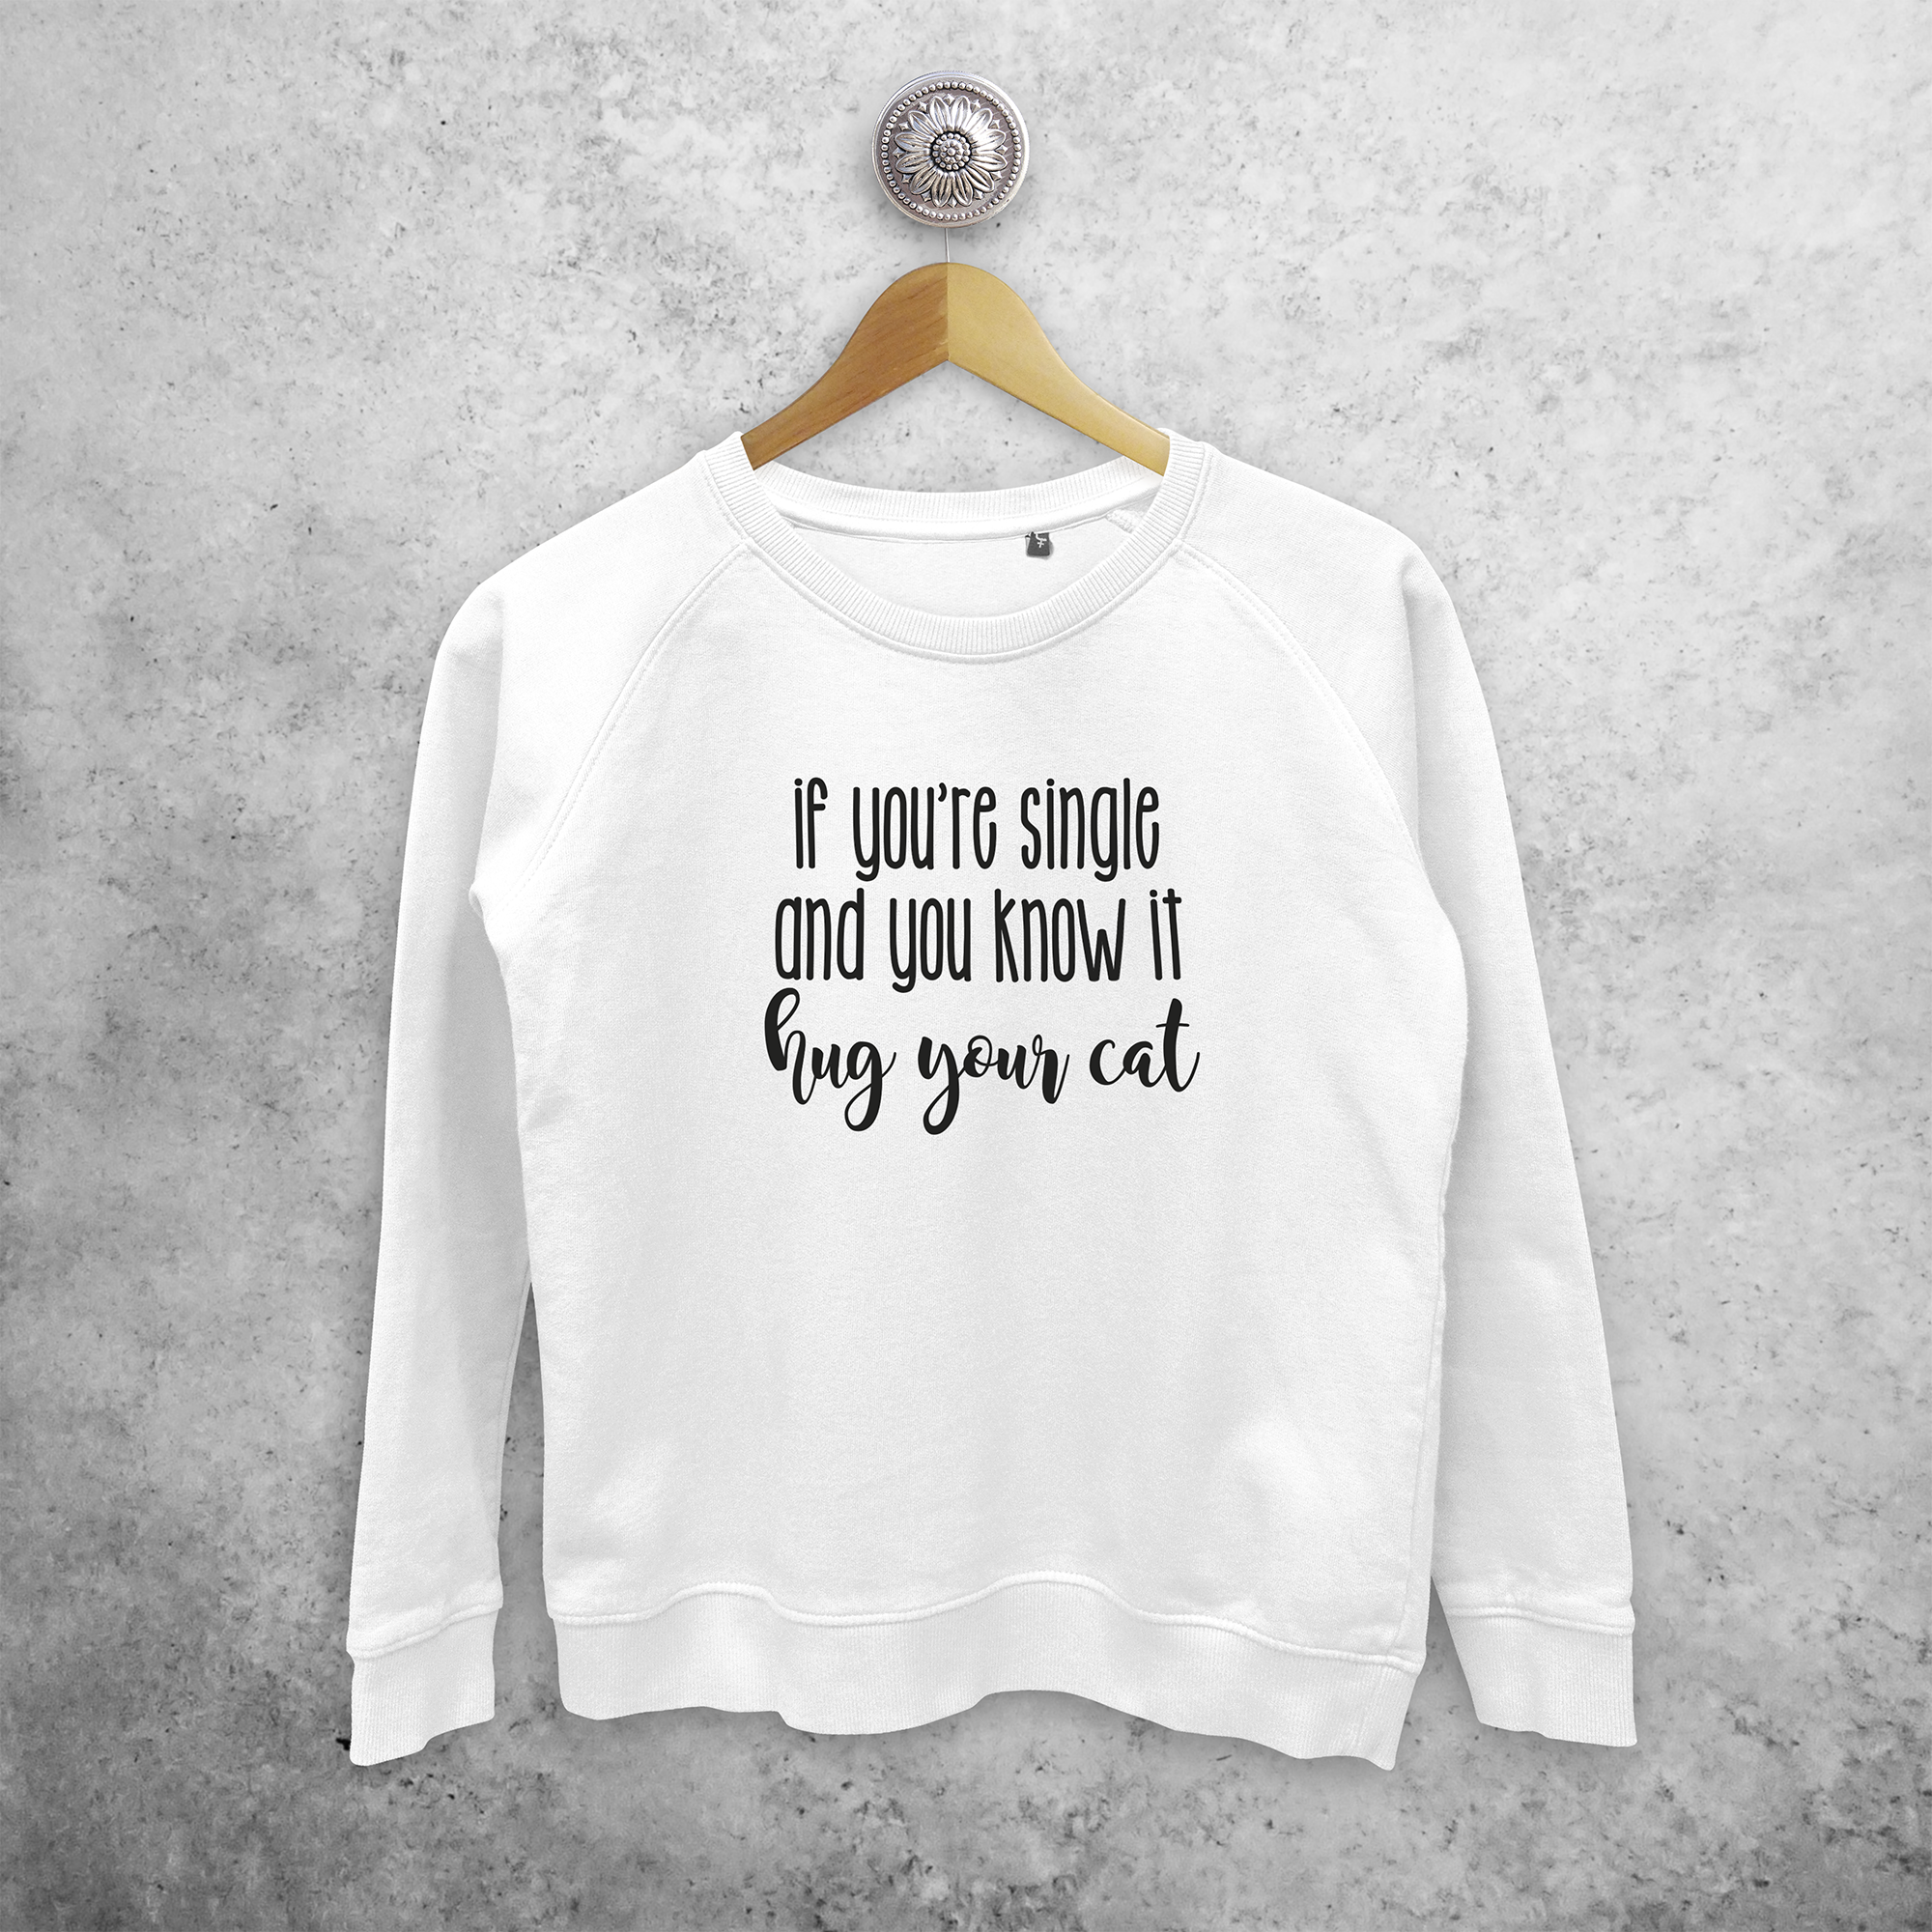 'If you're single and you know it, hug your cat' sweater